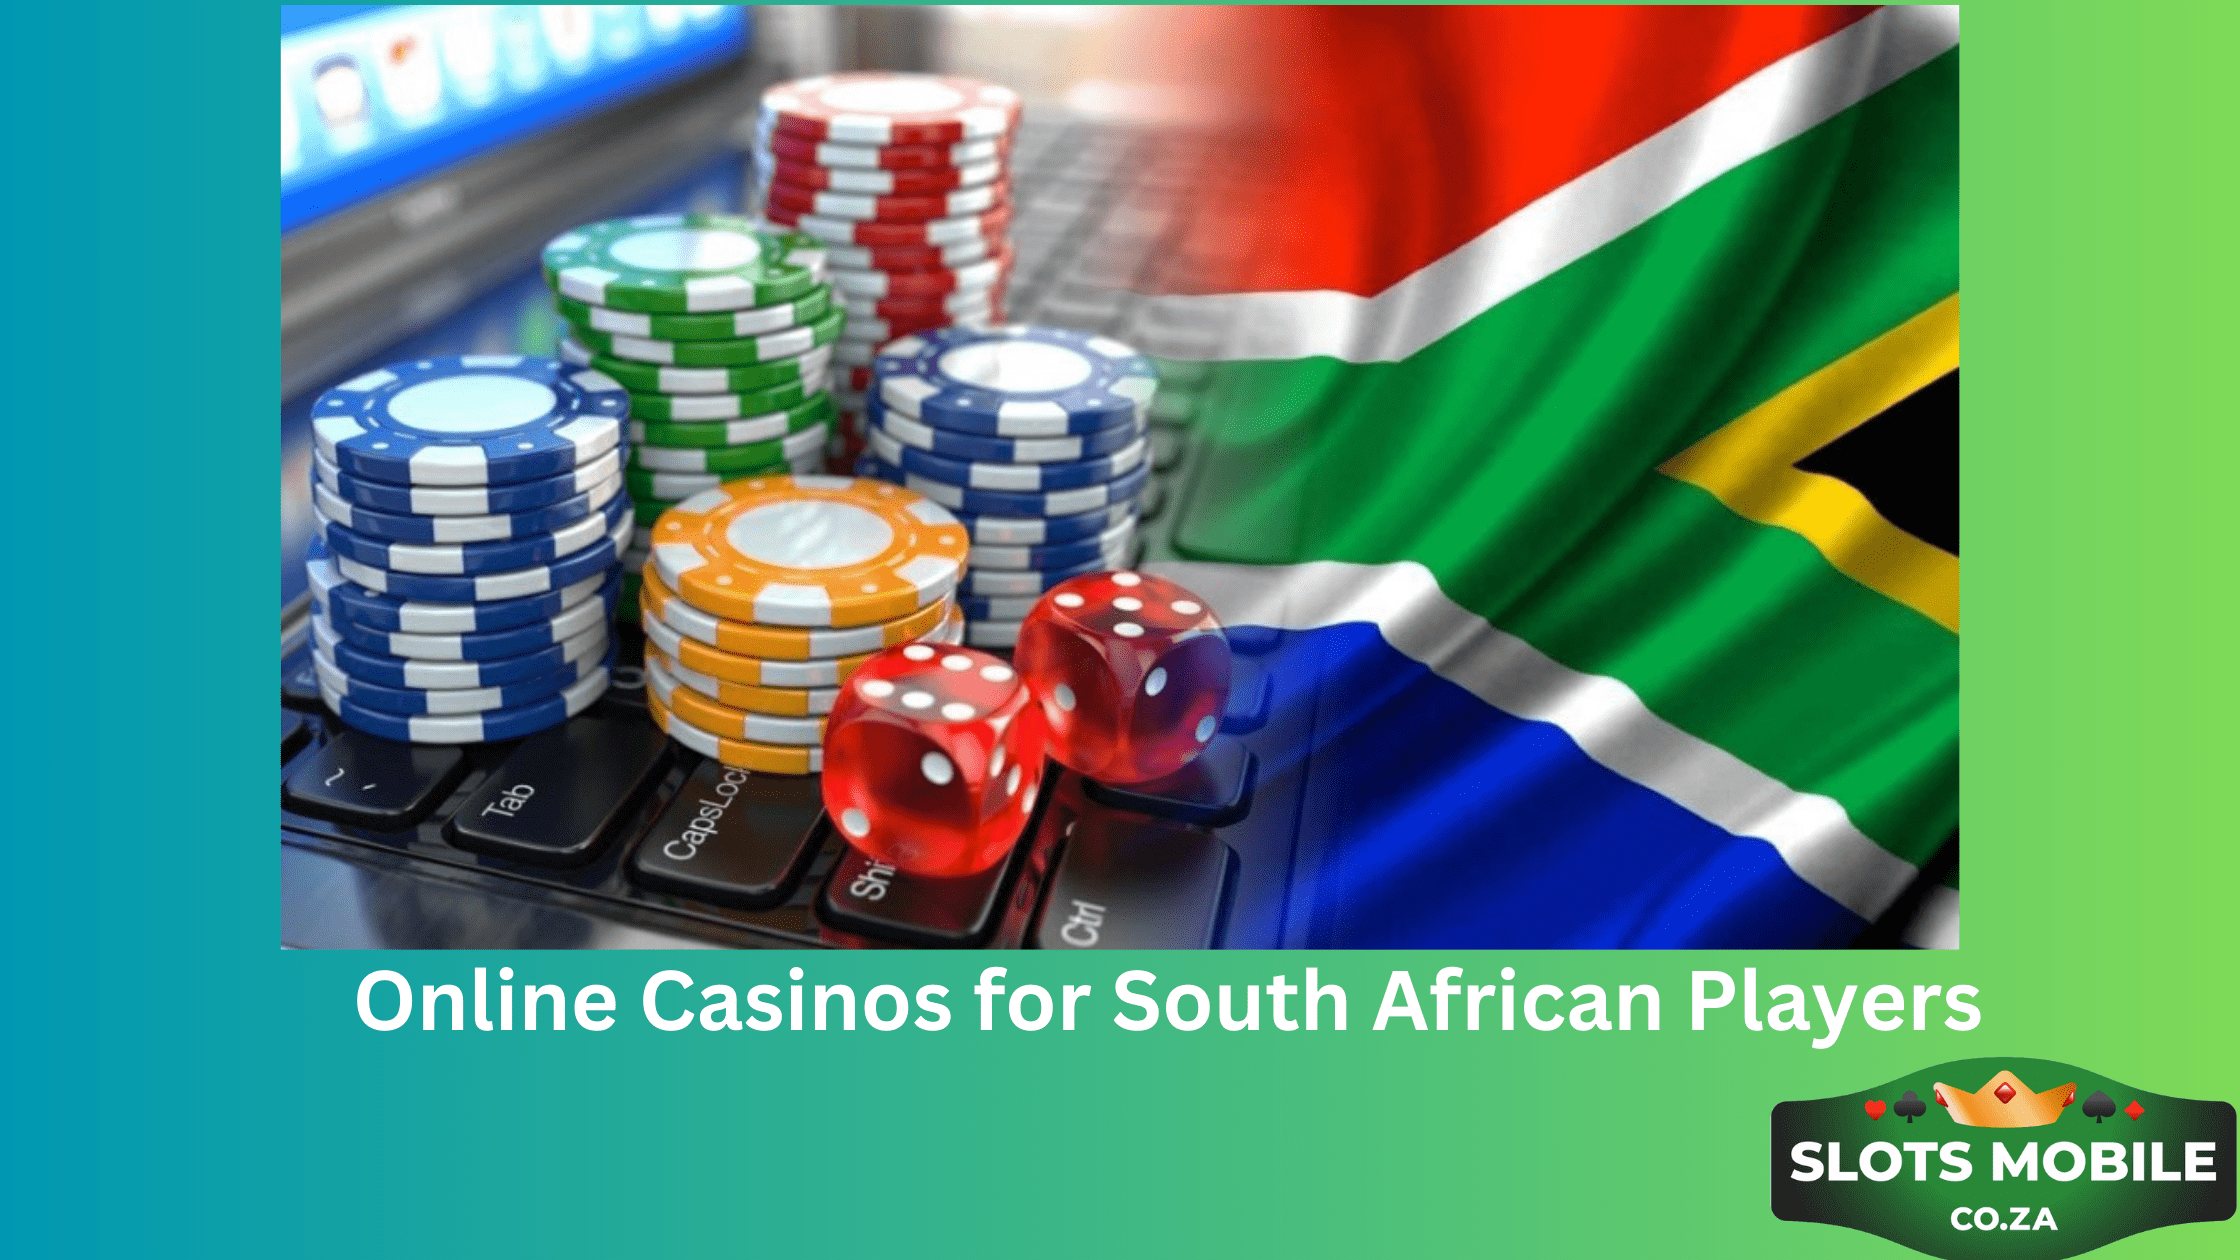 Online casinos for South African Players